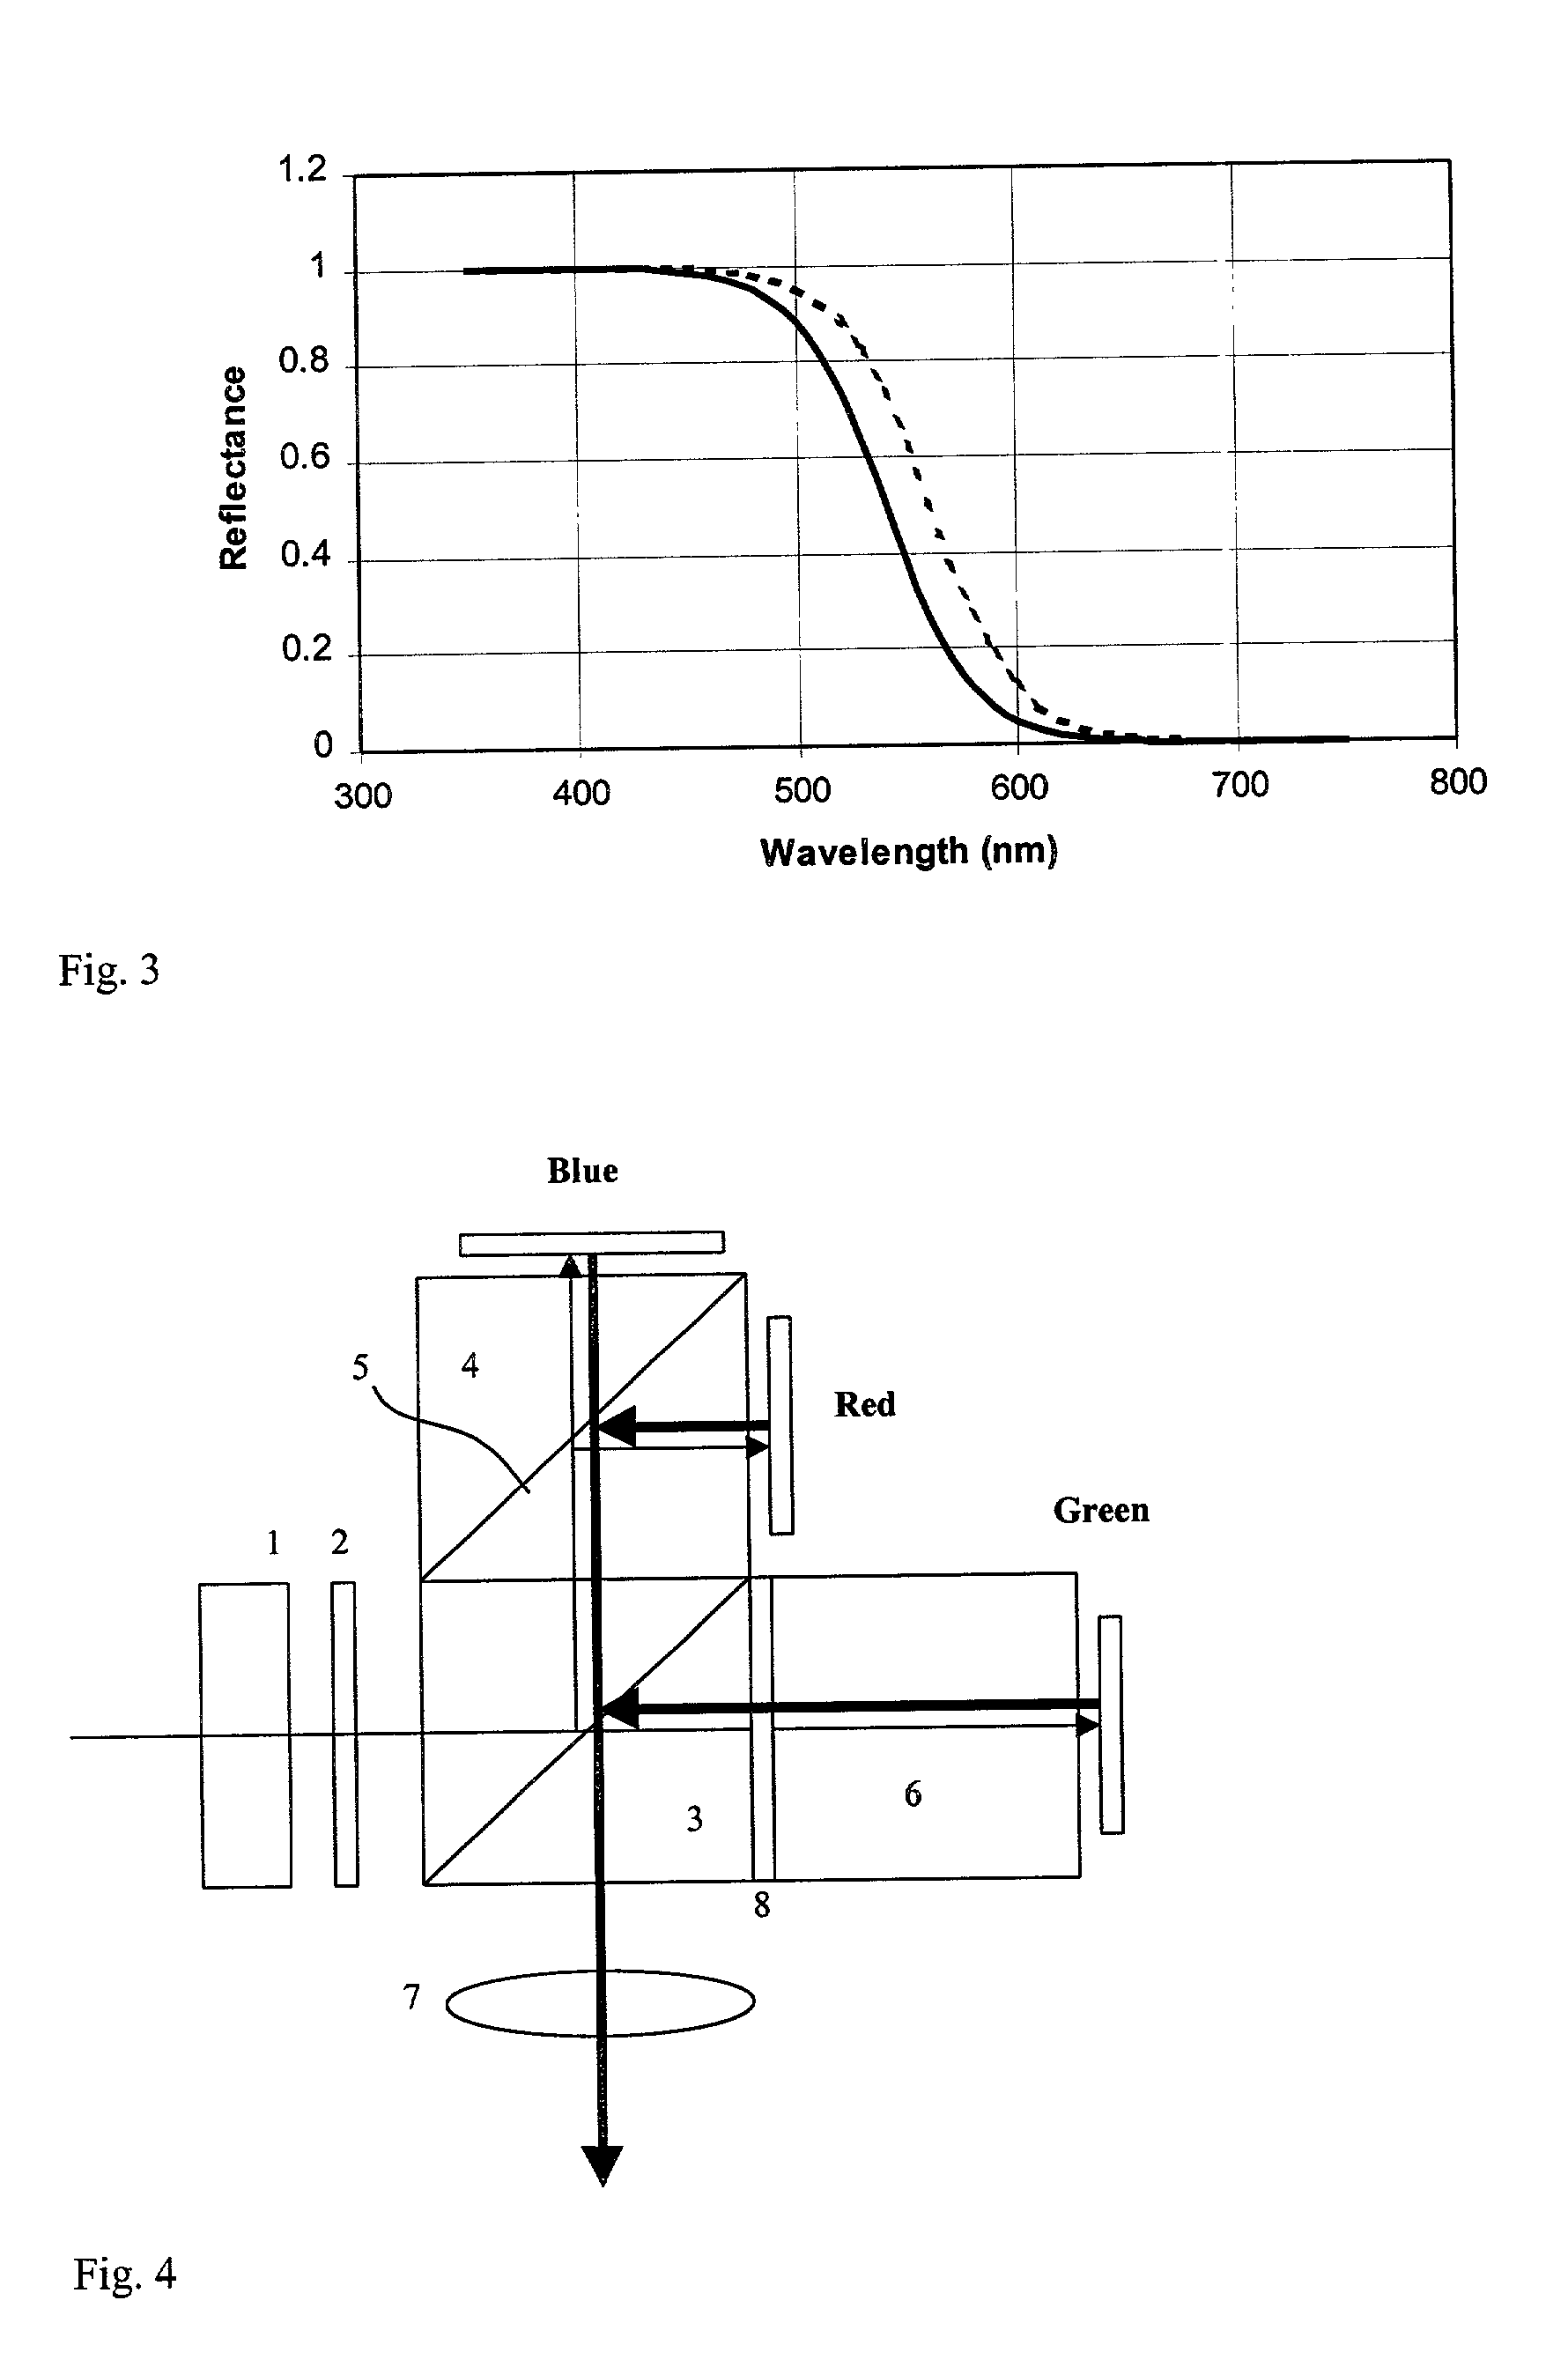 Optical systems for liquid crystal display projectors